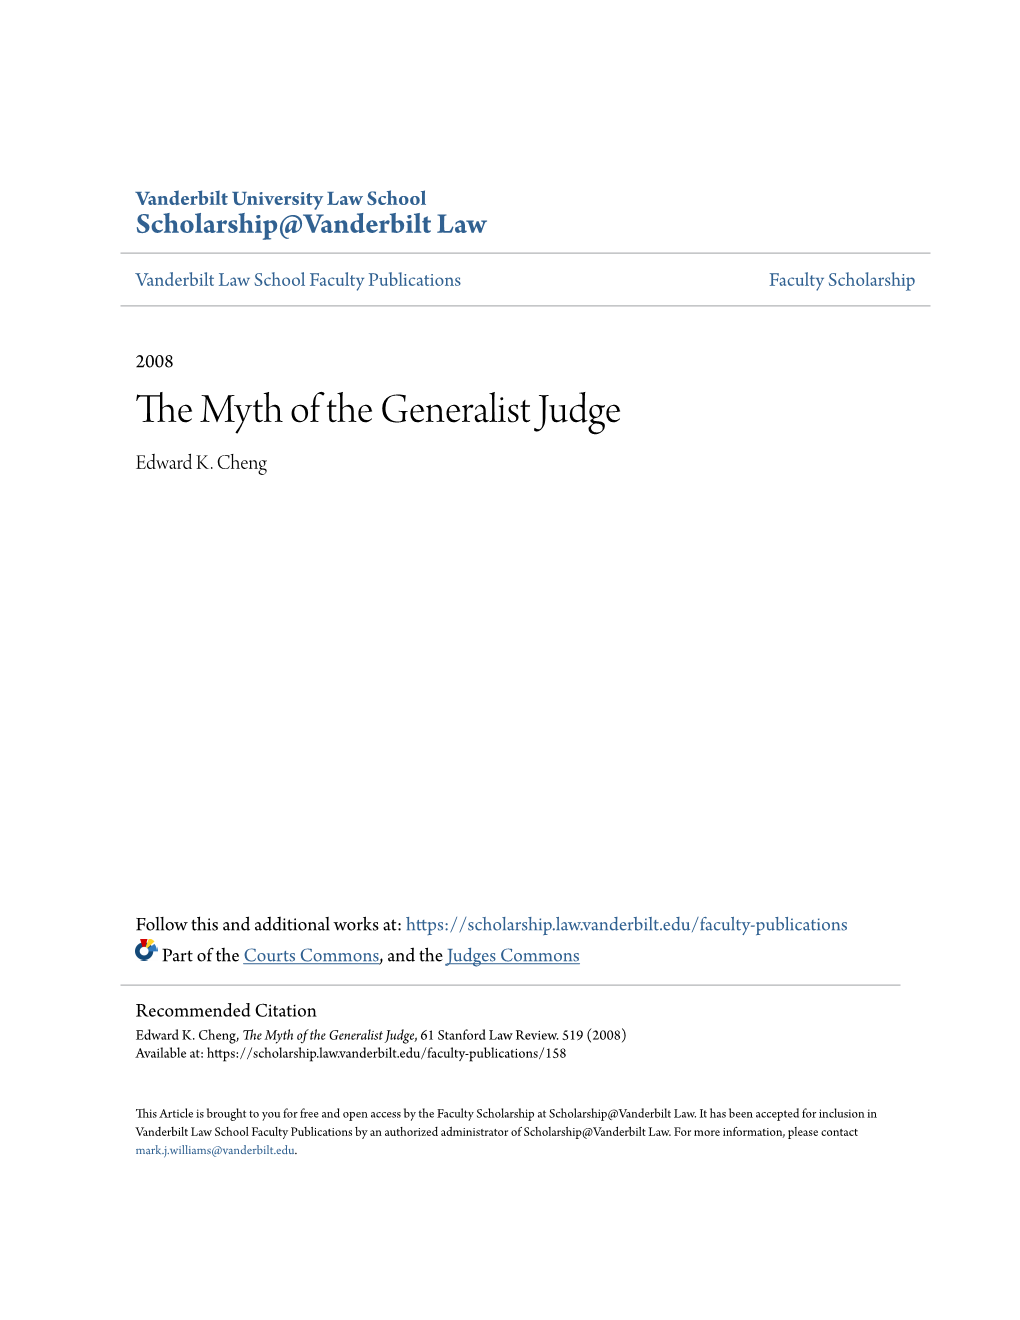 The Myth of the Generalist Judge, 61 Stanford Law Review